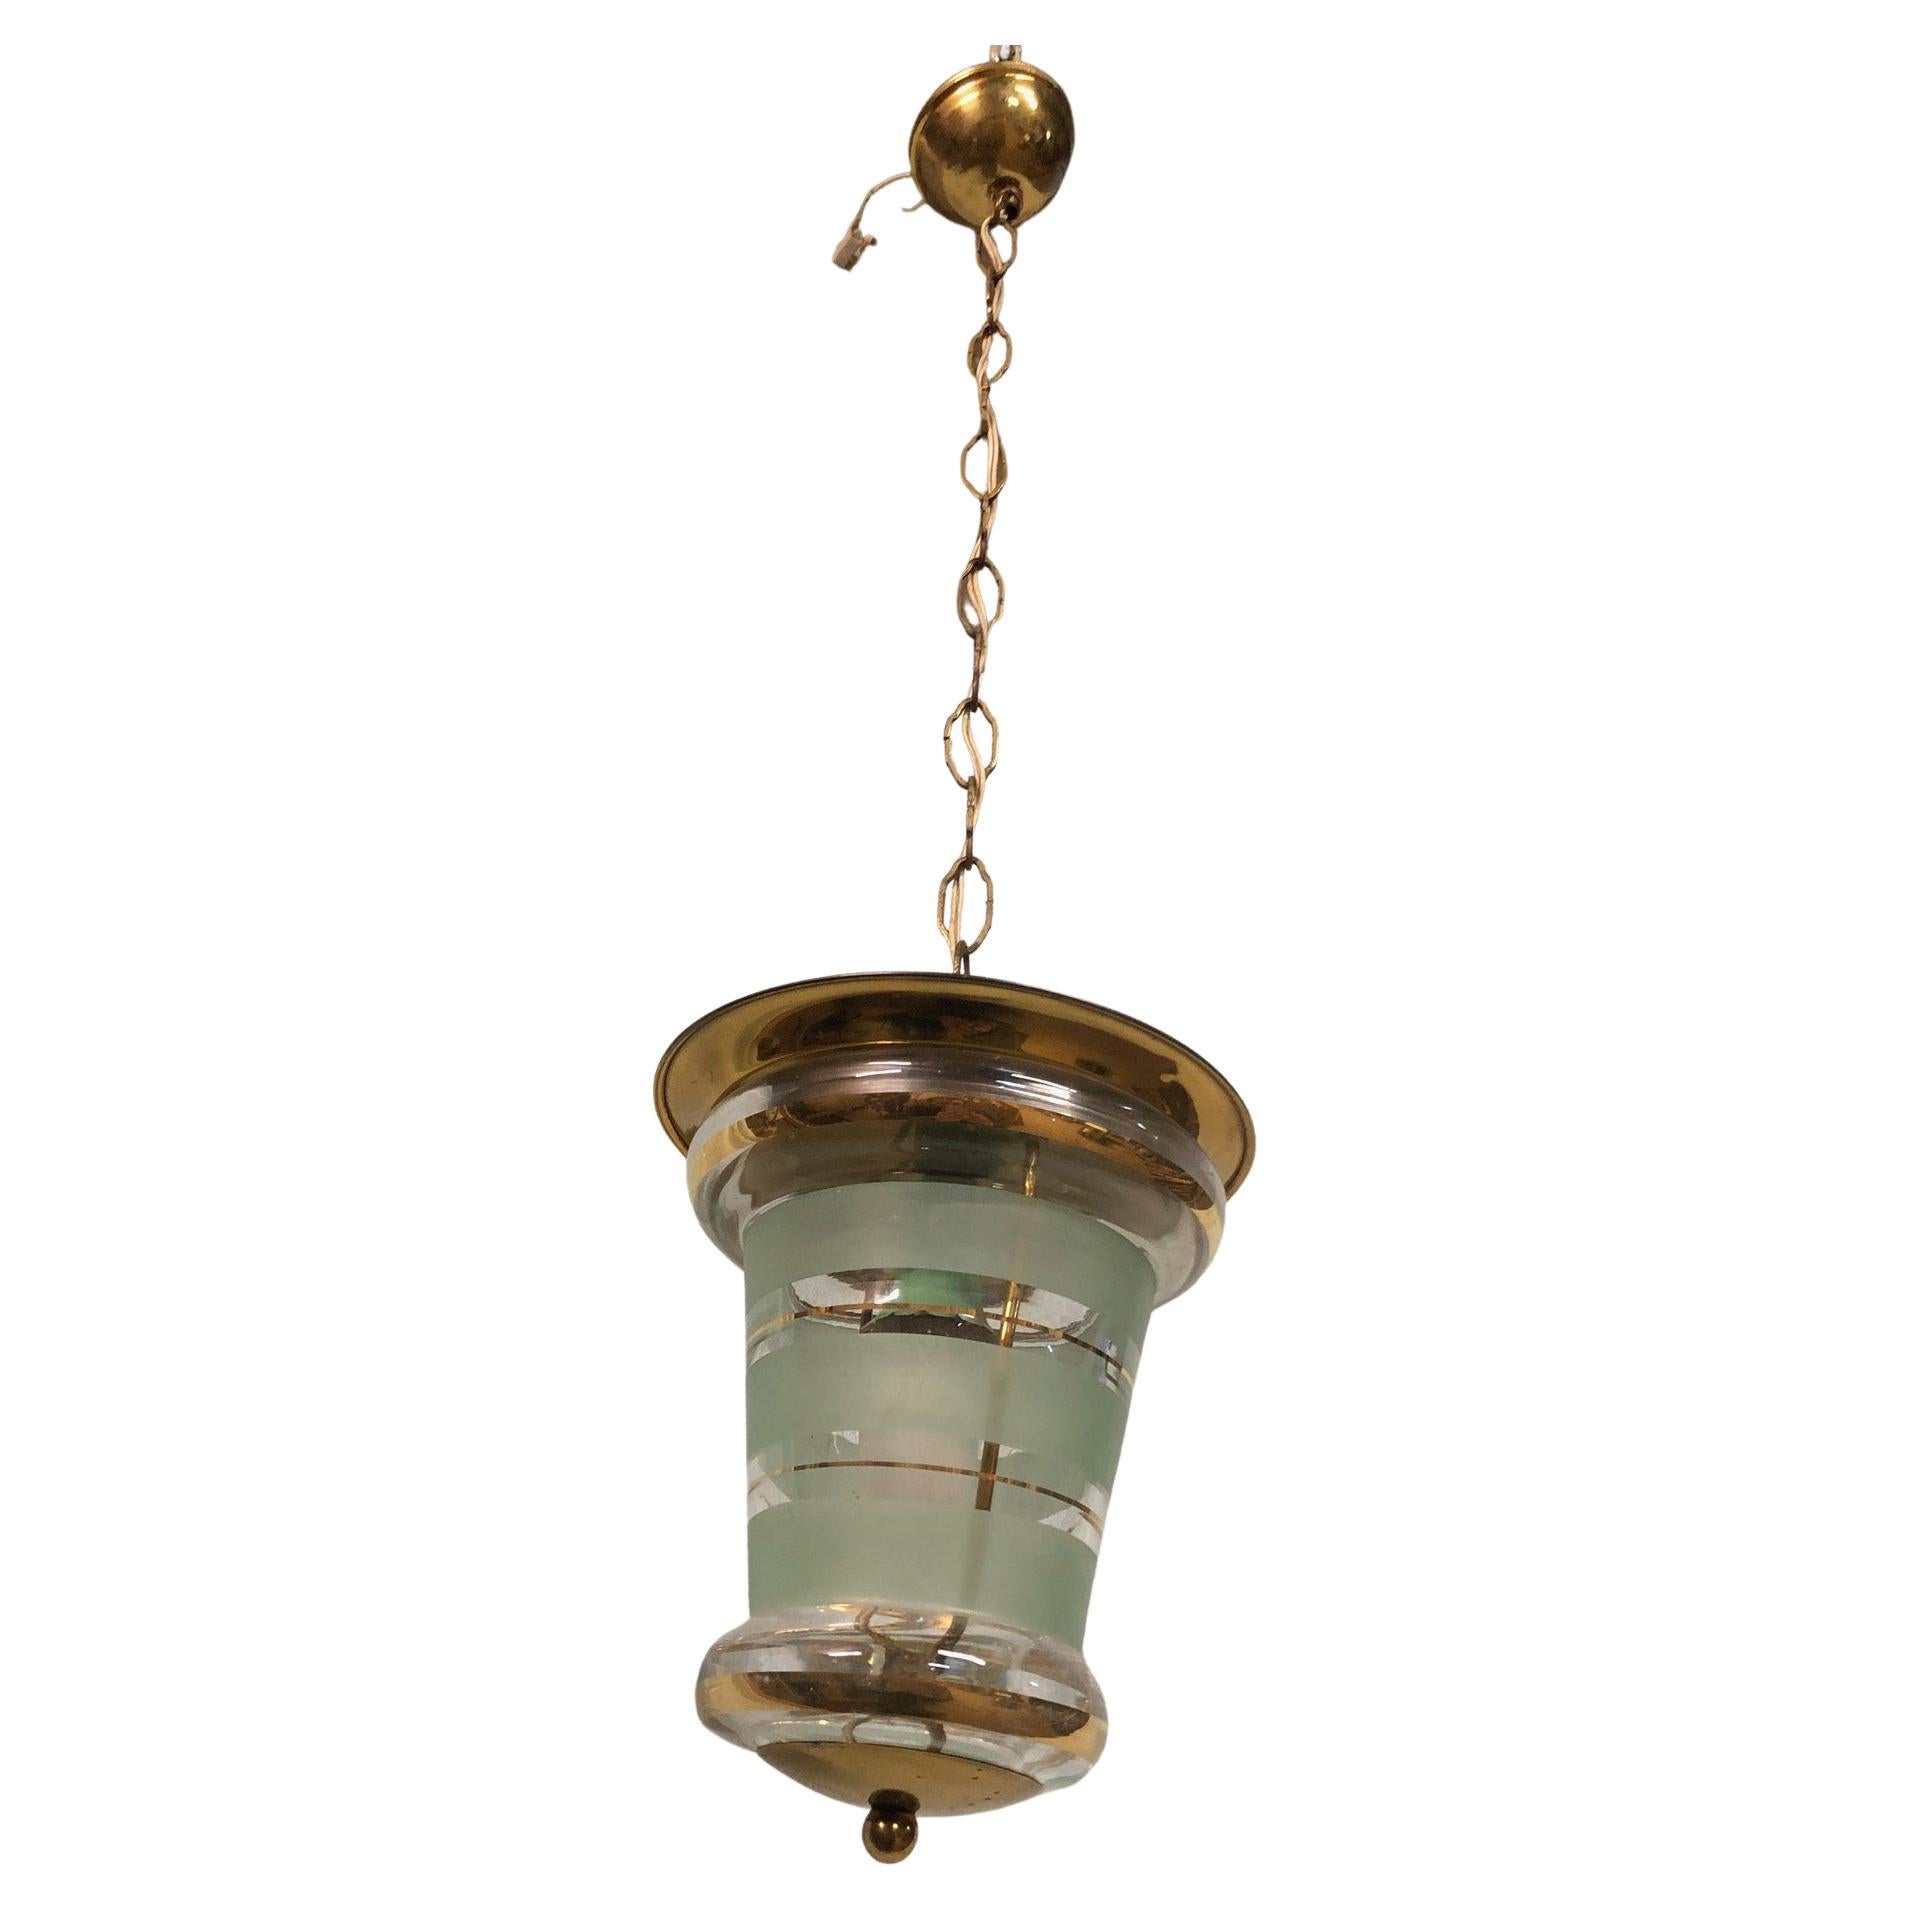 Italian Chandelier from 1950 with Original Glass and Brass